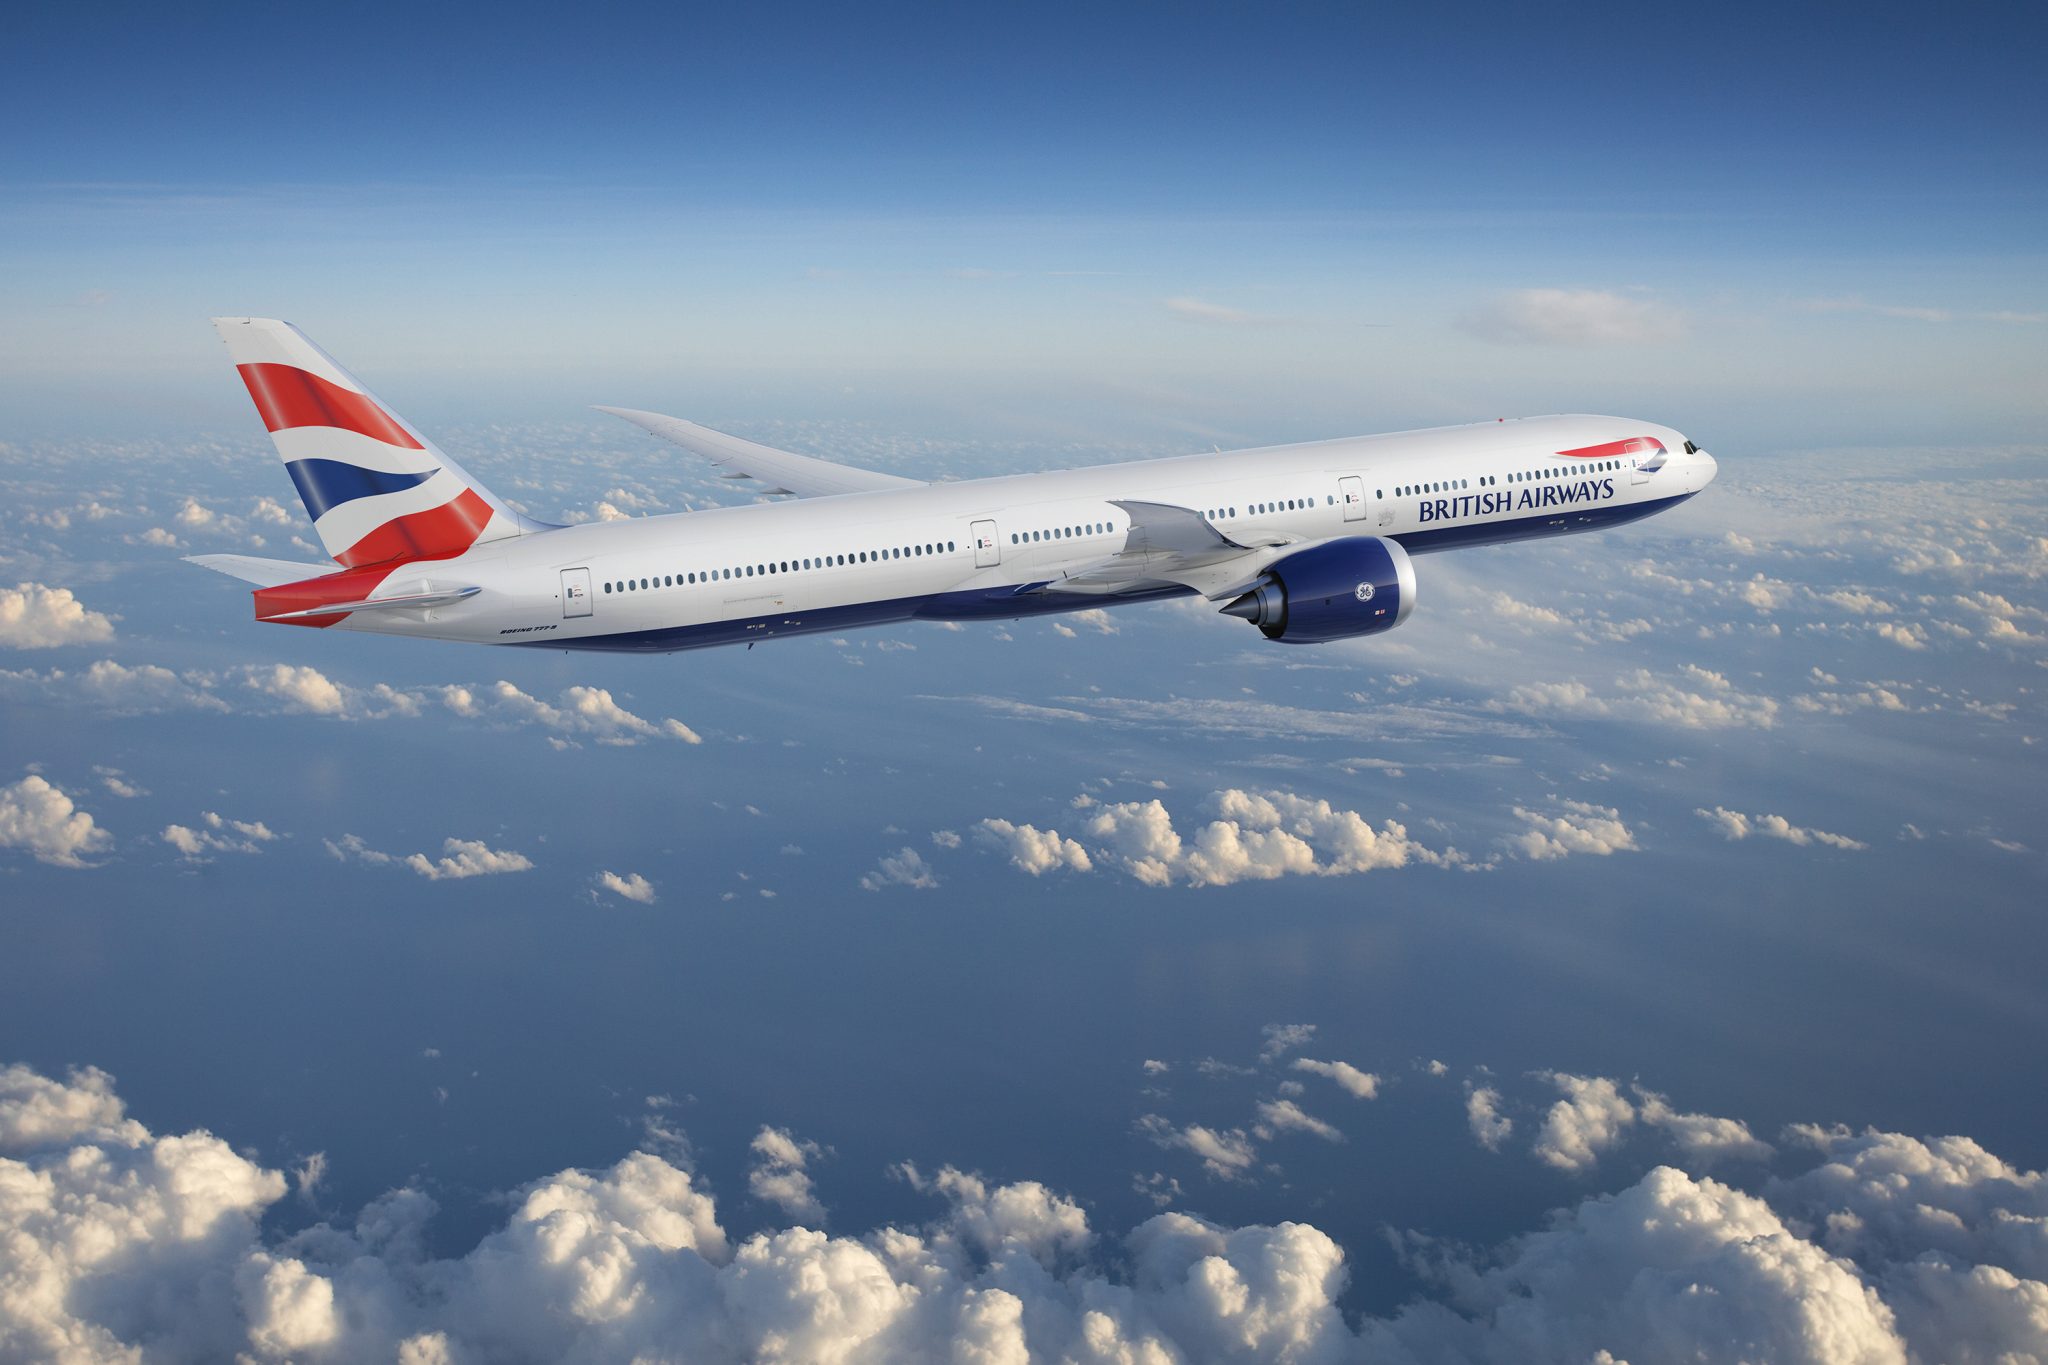 British Airways starts new route to Montego Bay and returns to Antigua, Barbados, Kingston and St Lucia